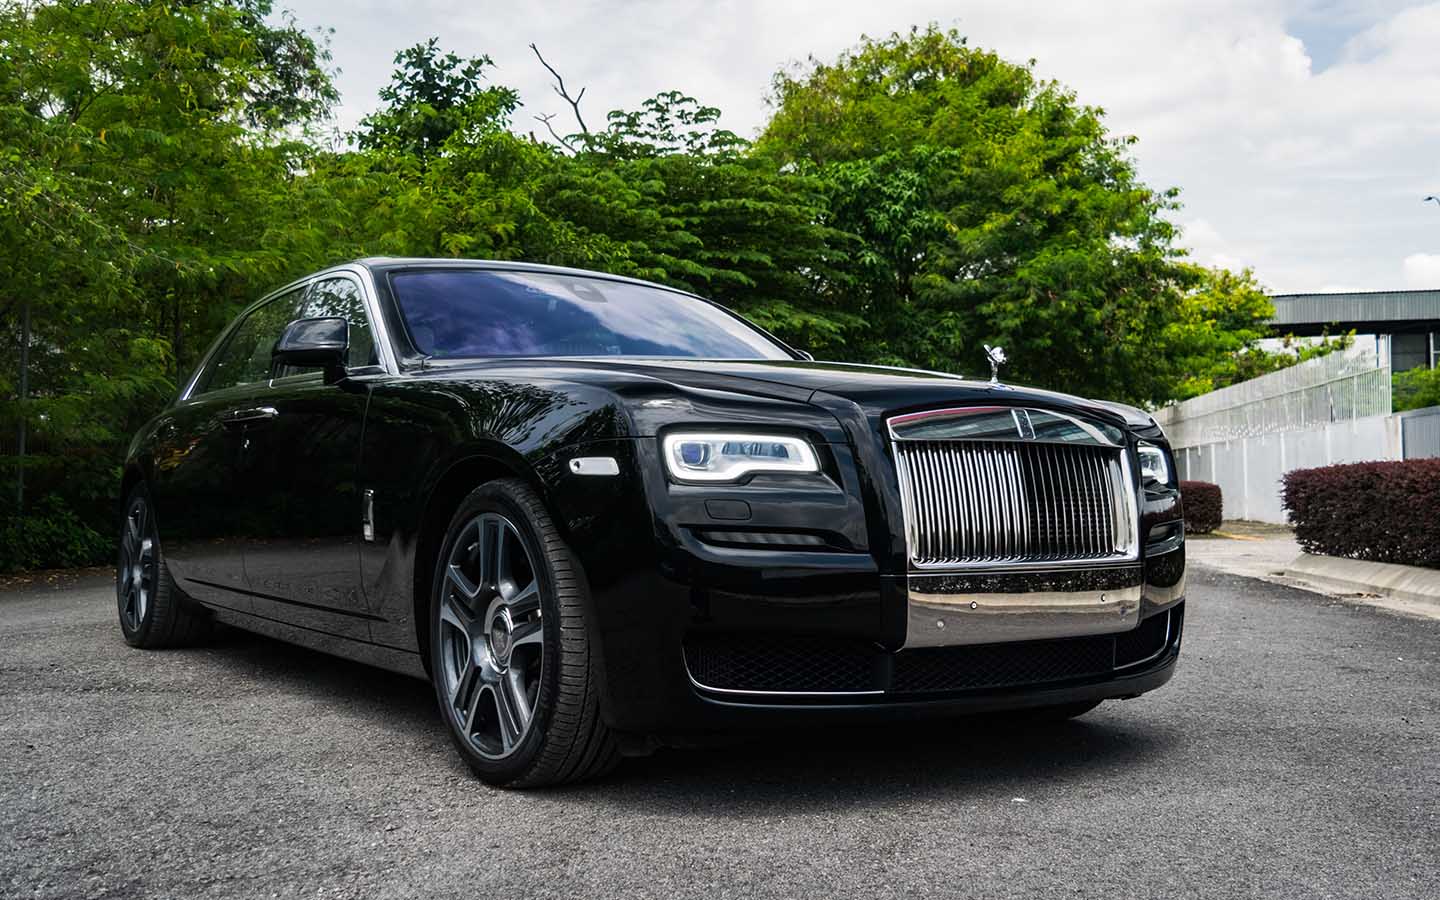 rolls-royce whispers is an exclusively available for the brand's vehicle owners